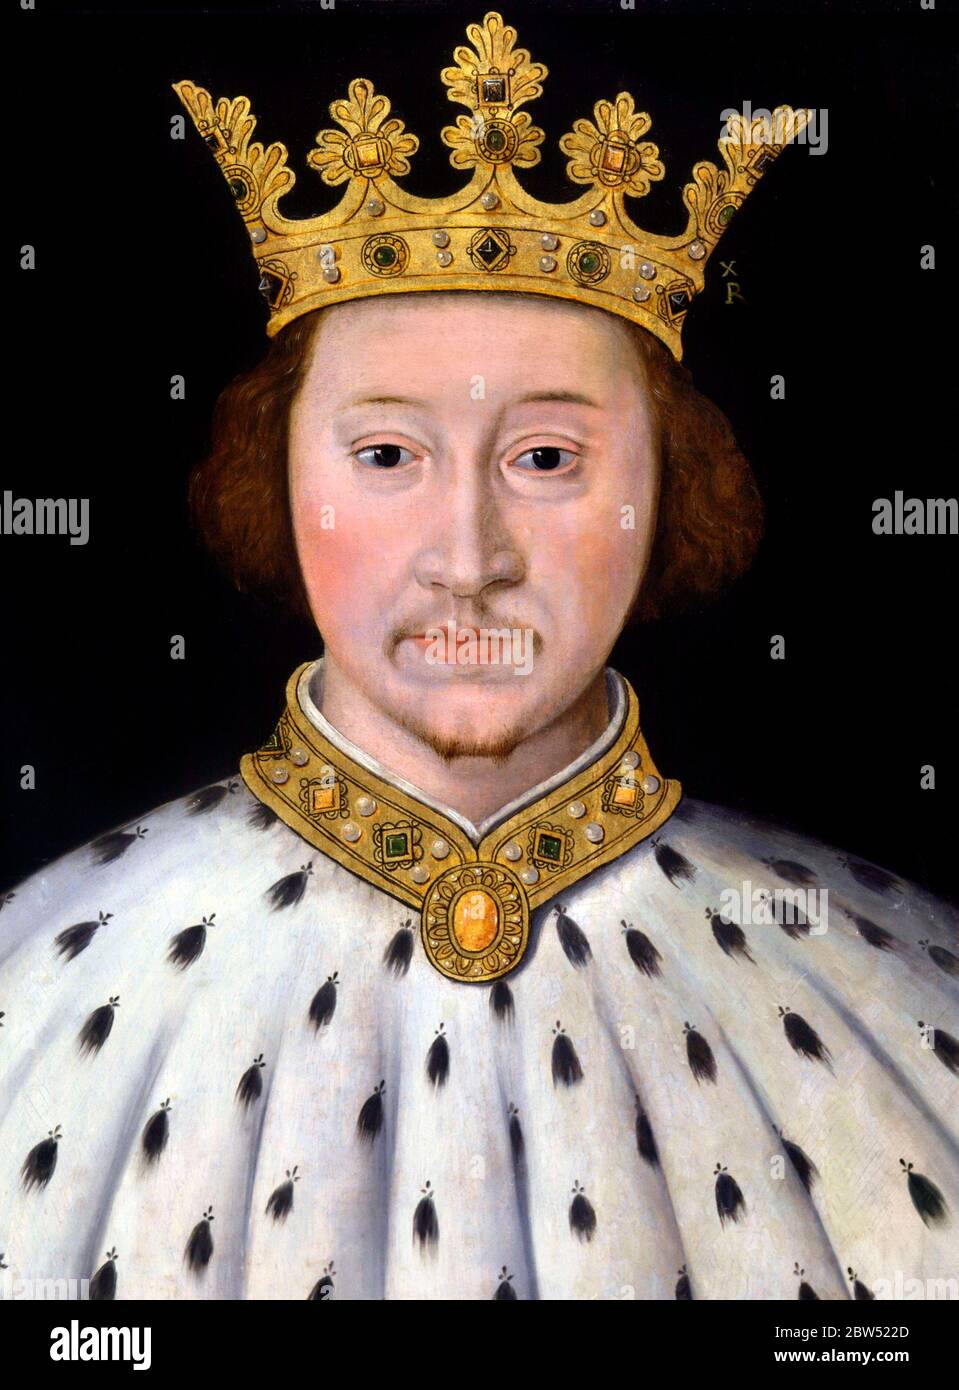 Portrait of King Richard II of England (1367-1400), reigned from 1377-1399 Stock Photo